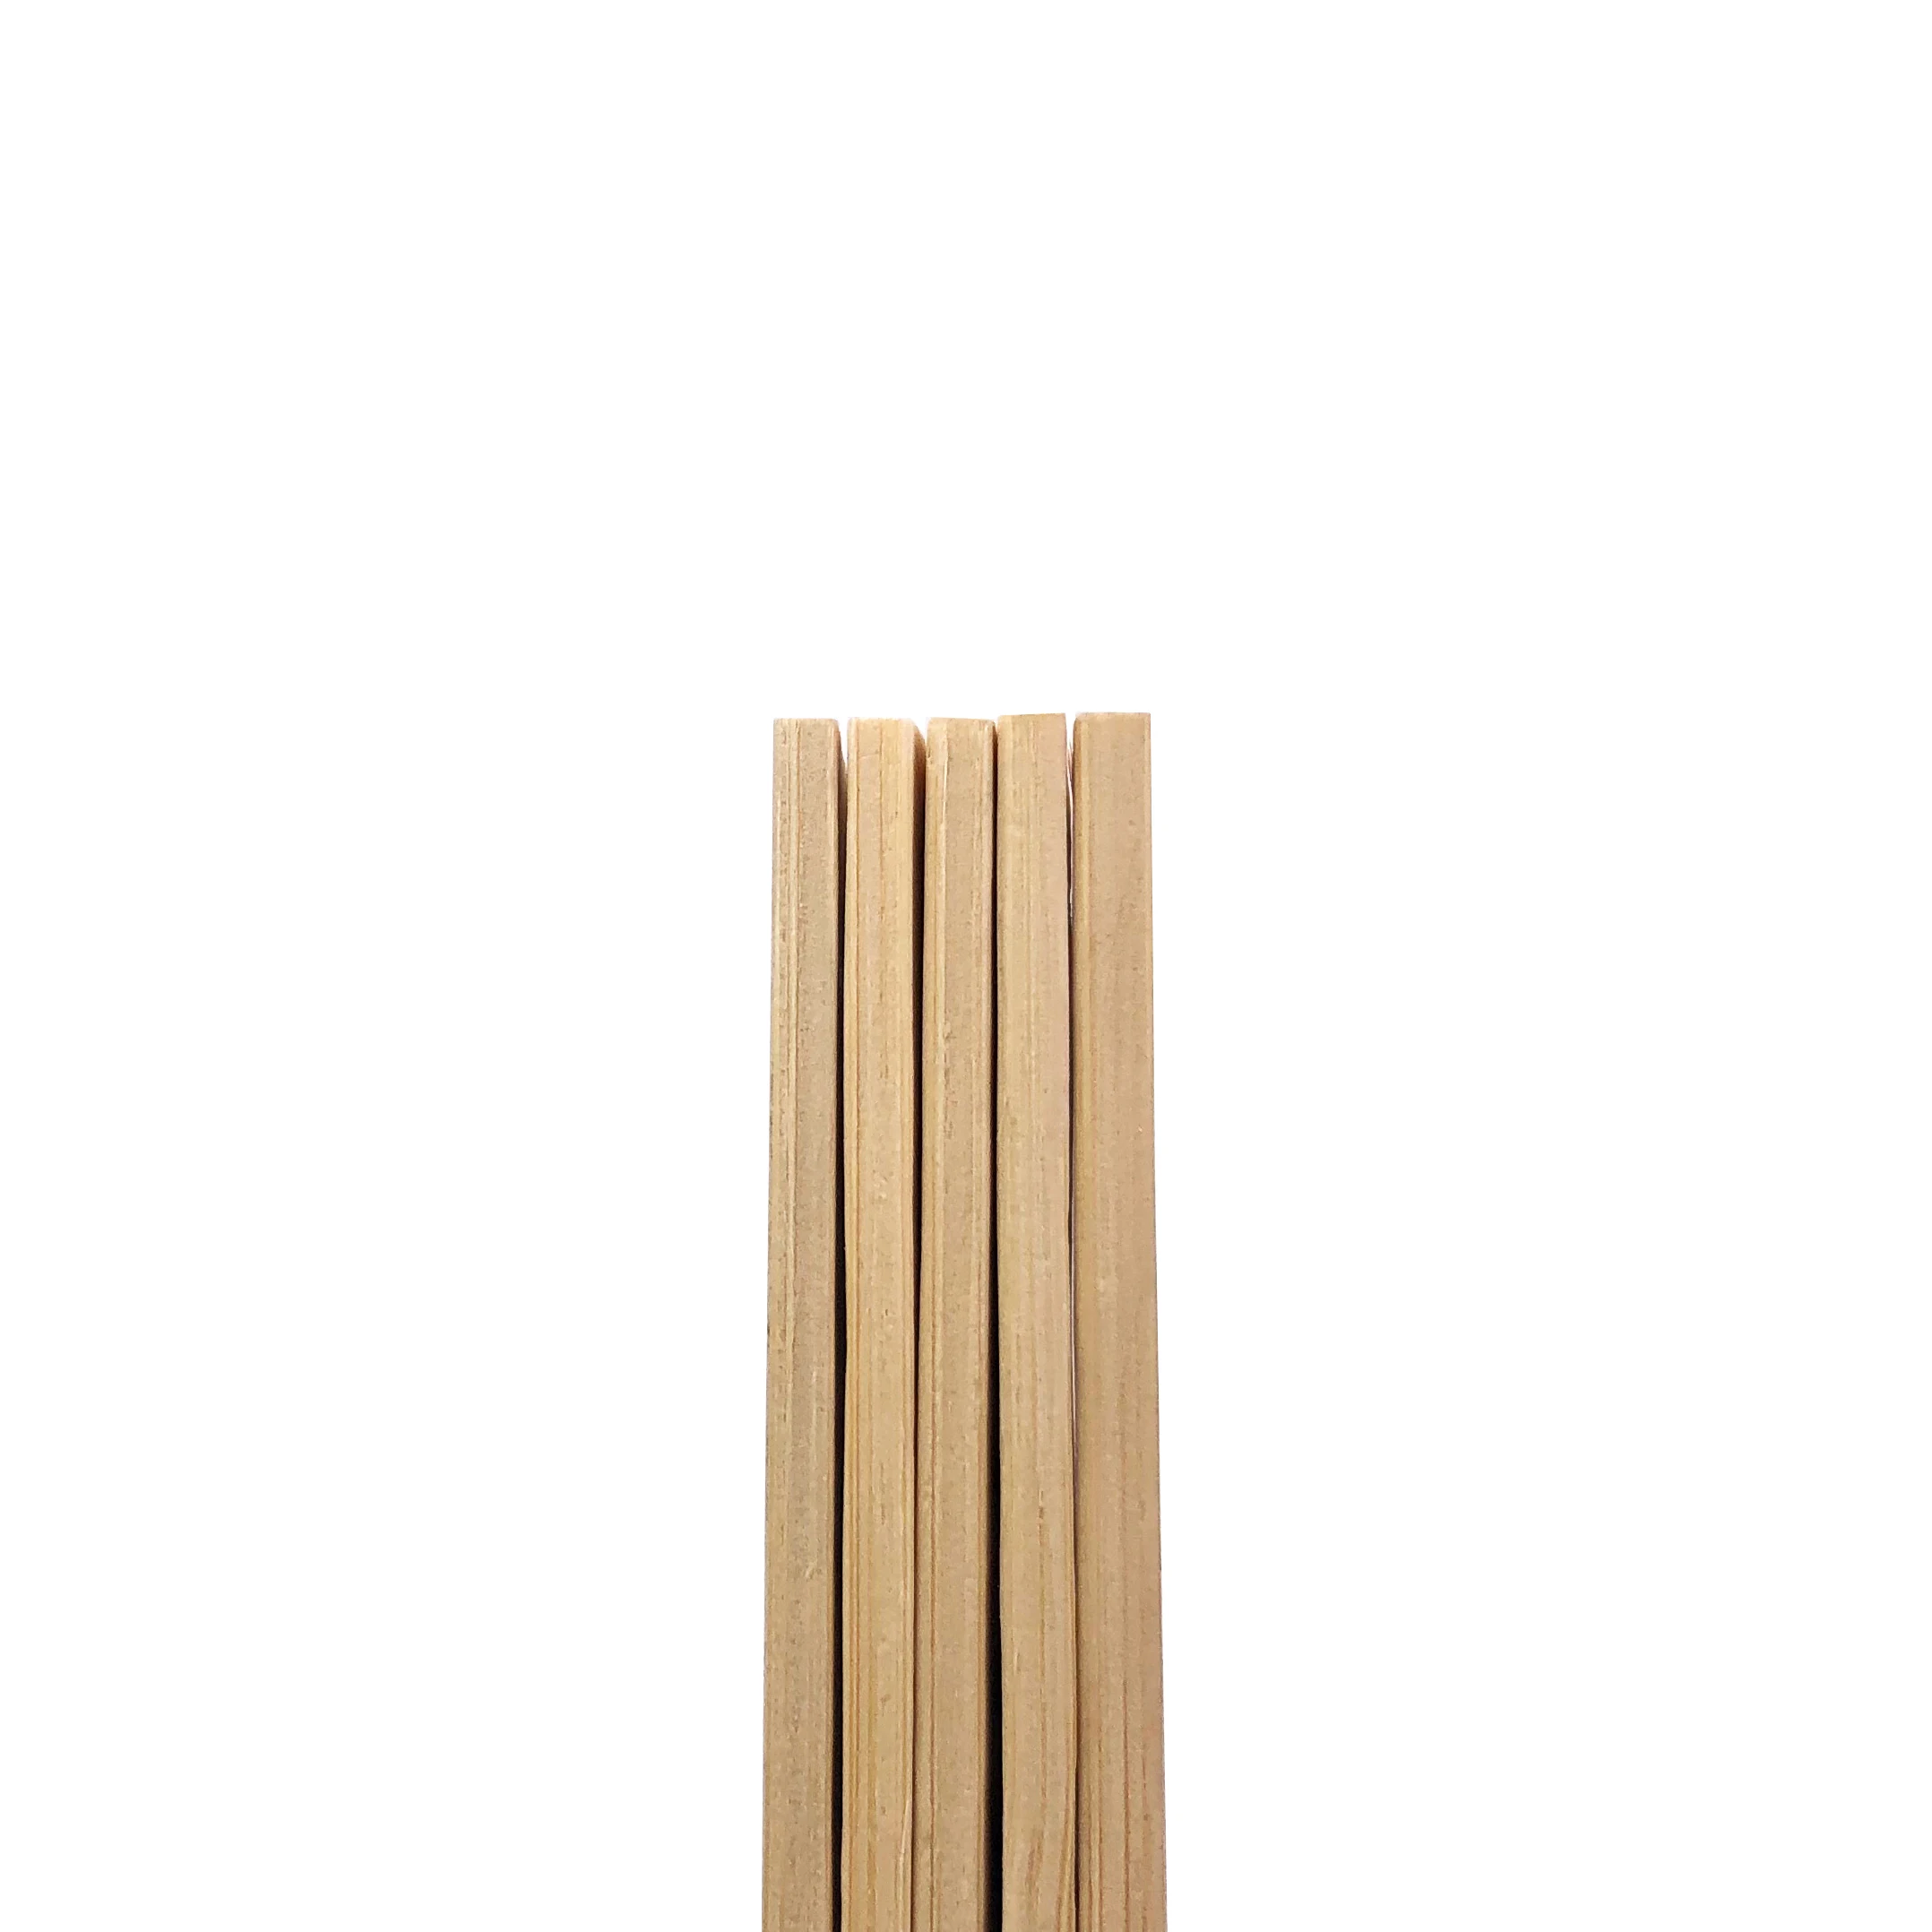 11 Inch Bamboo Paint Stir Sticks for Mixing Paint